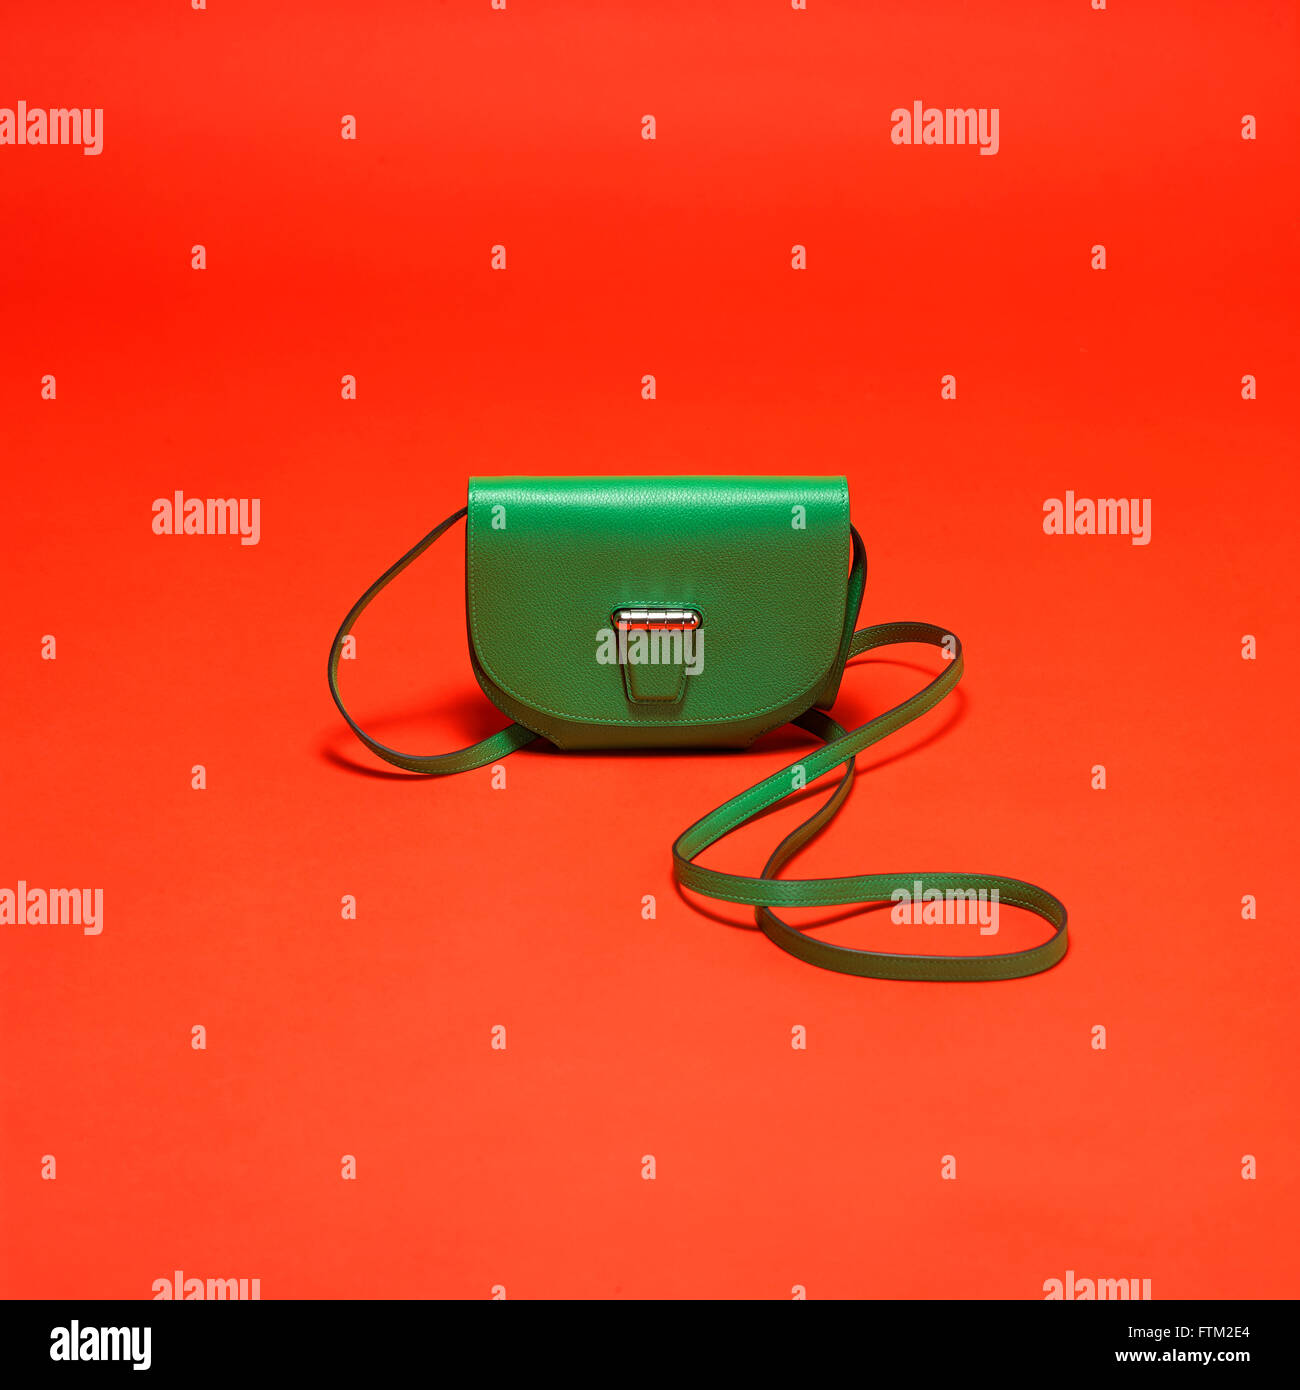 Green leather bag on an orange background Stock Photo